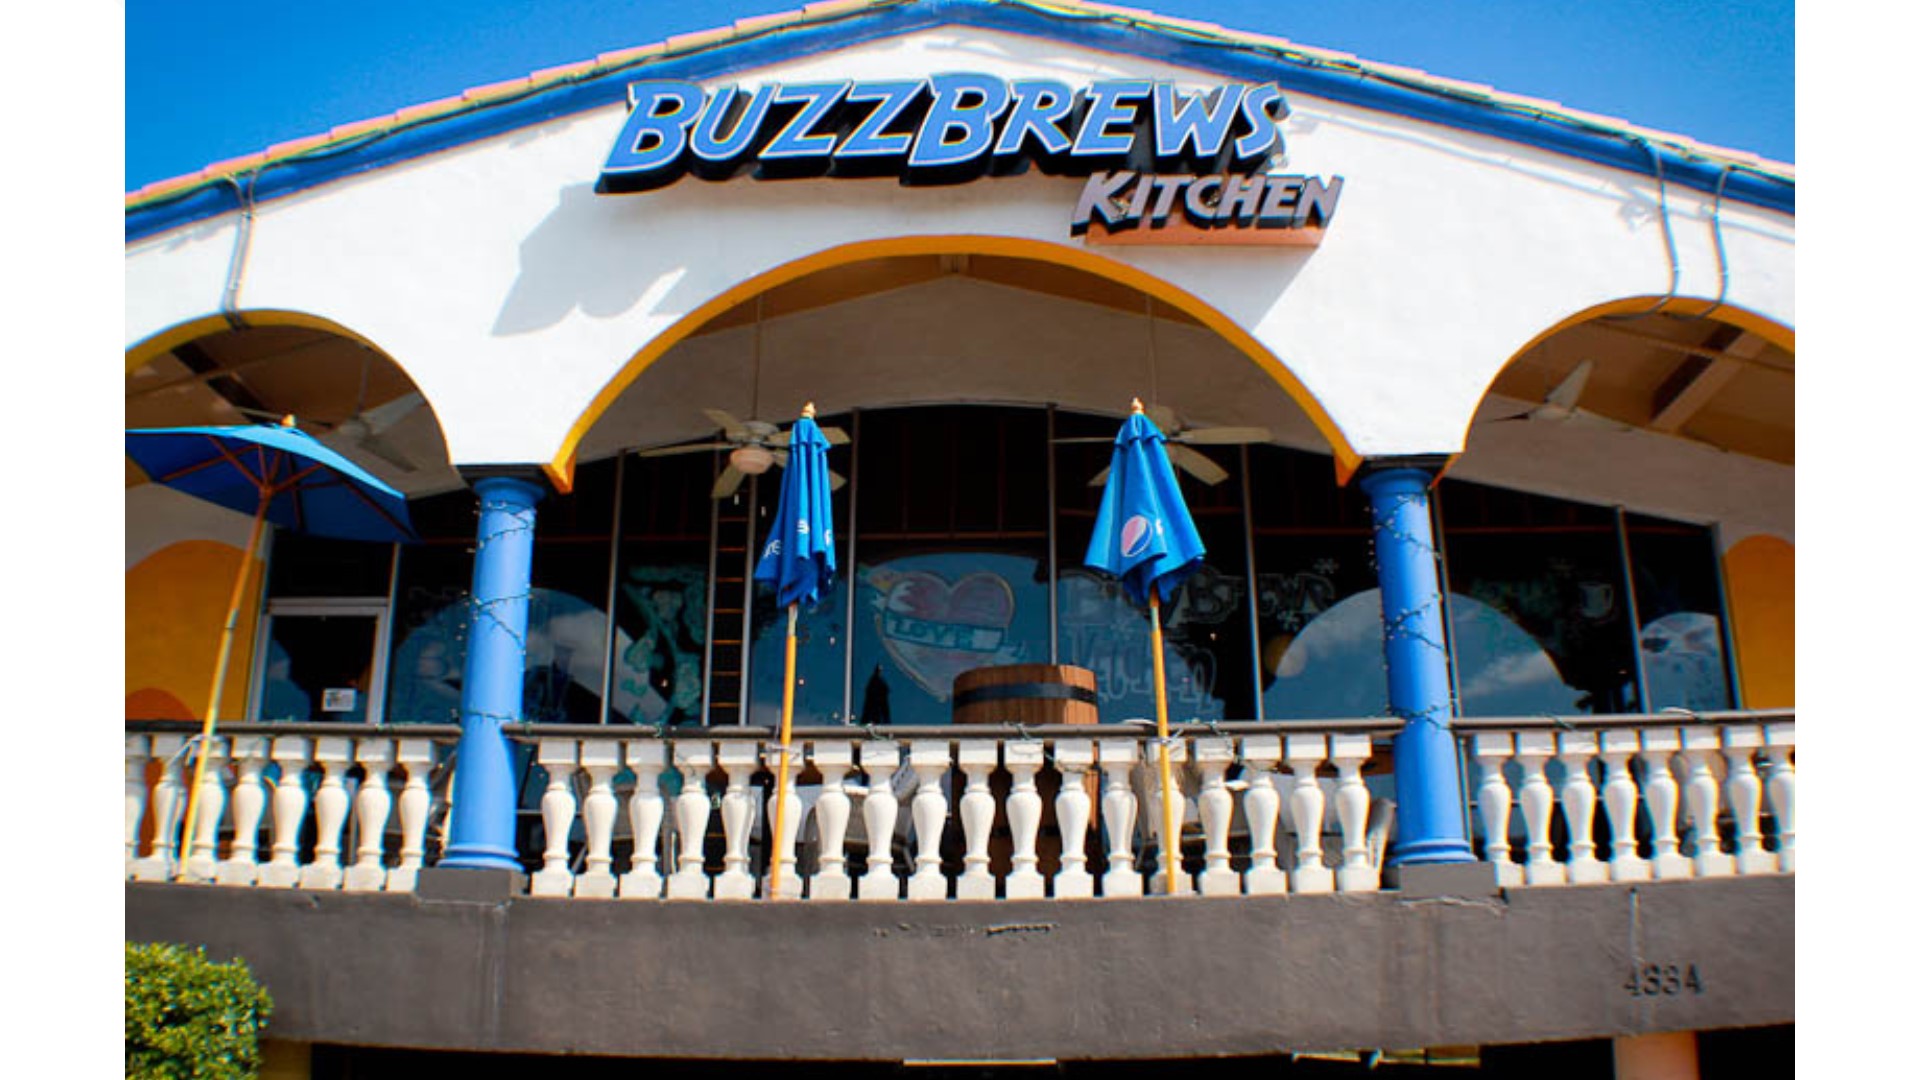 Buzzbrews Inc., the Dallas-based company behind eateries known for hearty breakfasts and late hours, filed Dec. 11 for Chapter 7 bankruptcy protection.